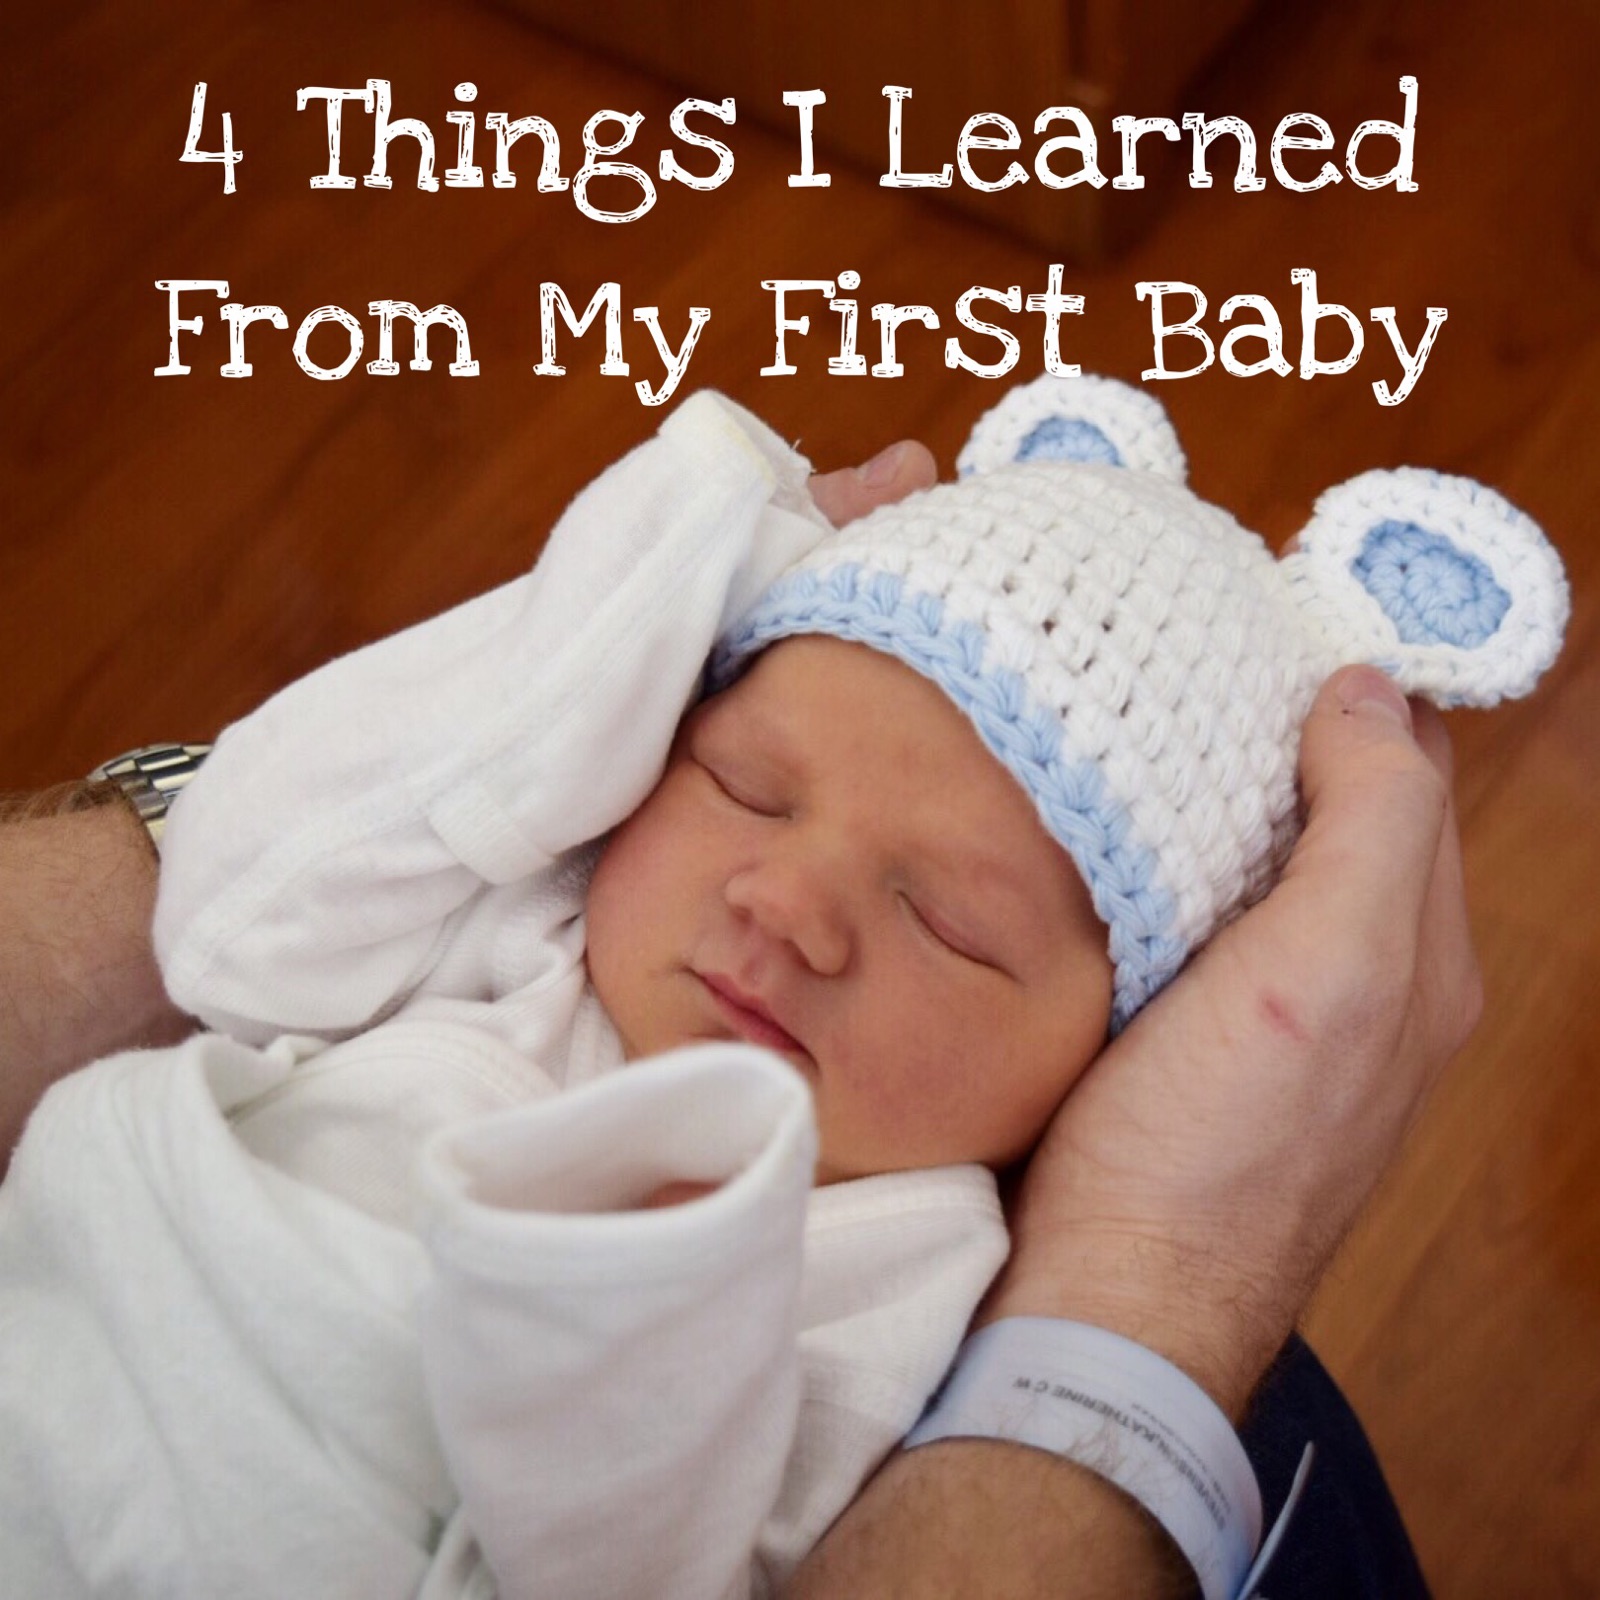 4 Things I Learned from My First Baby